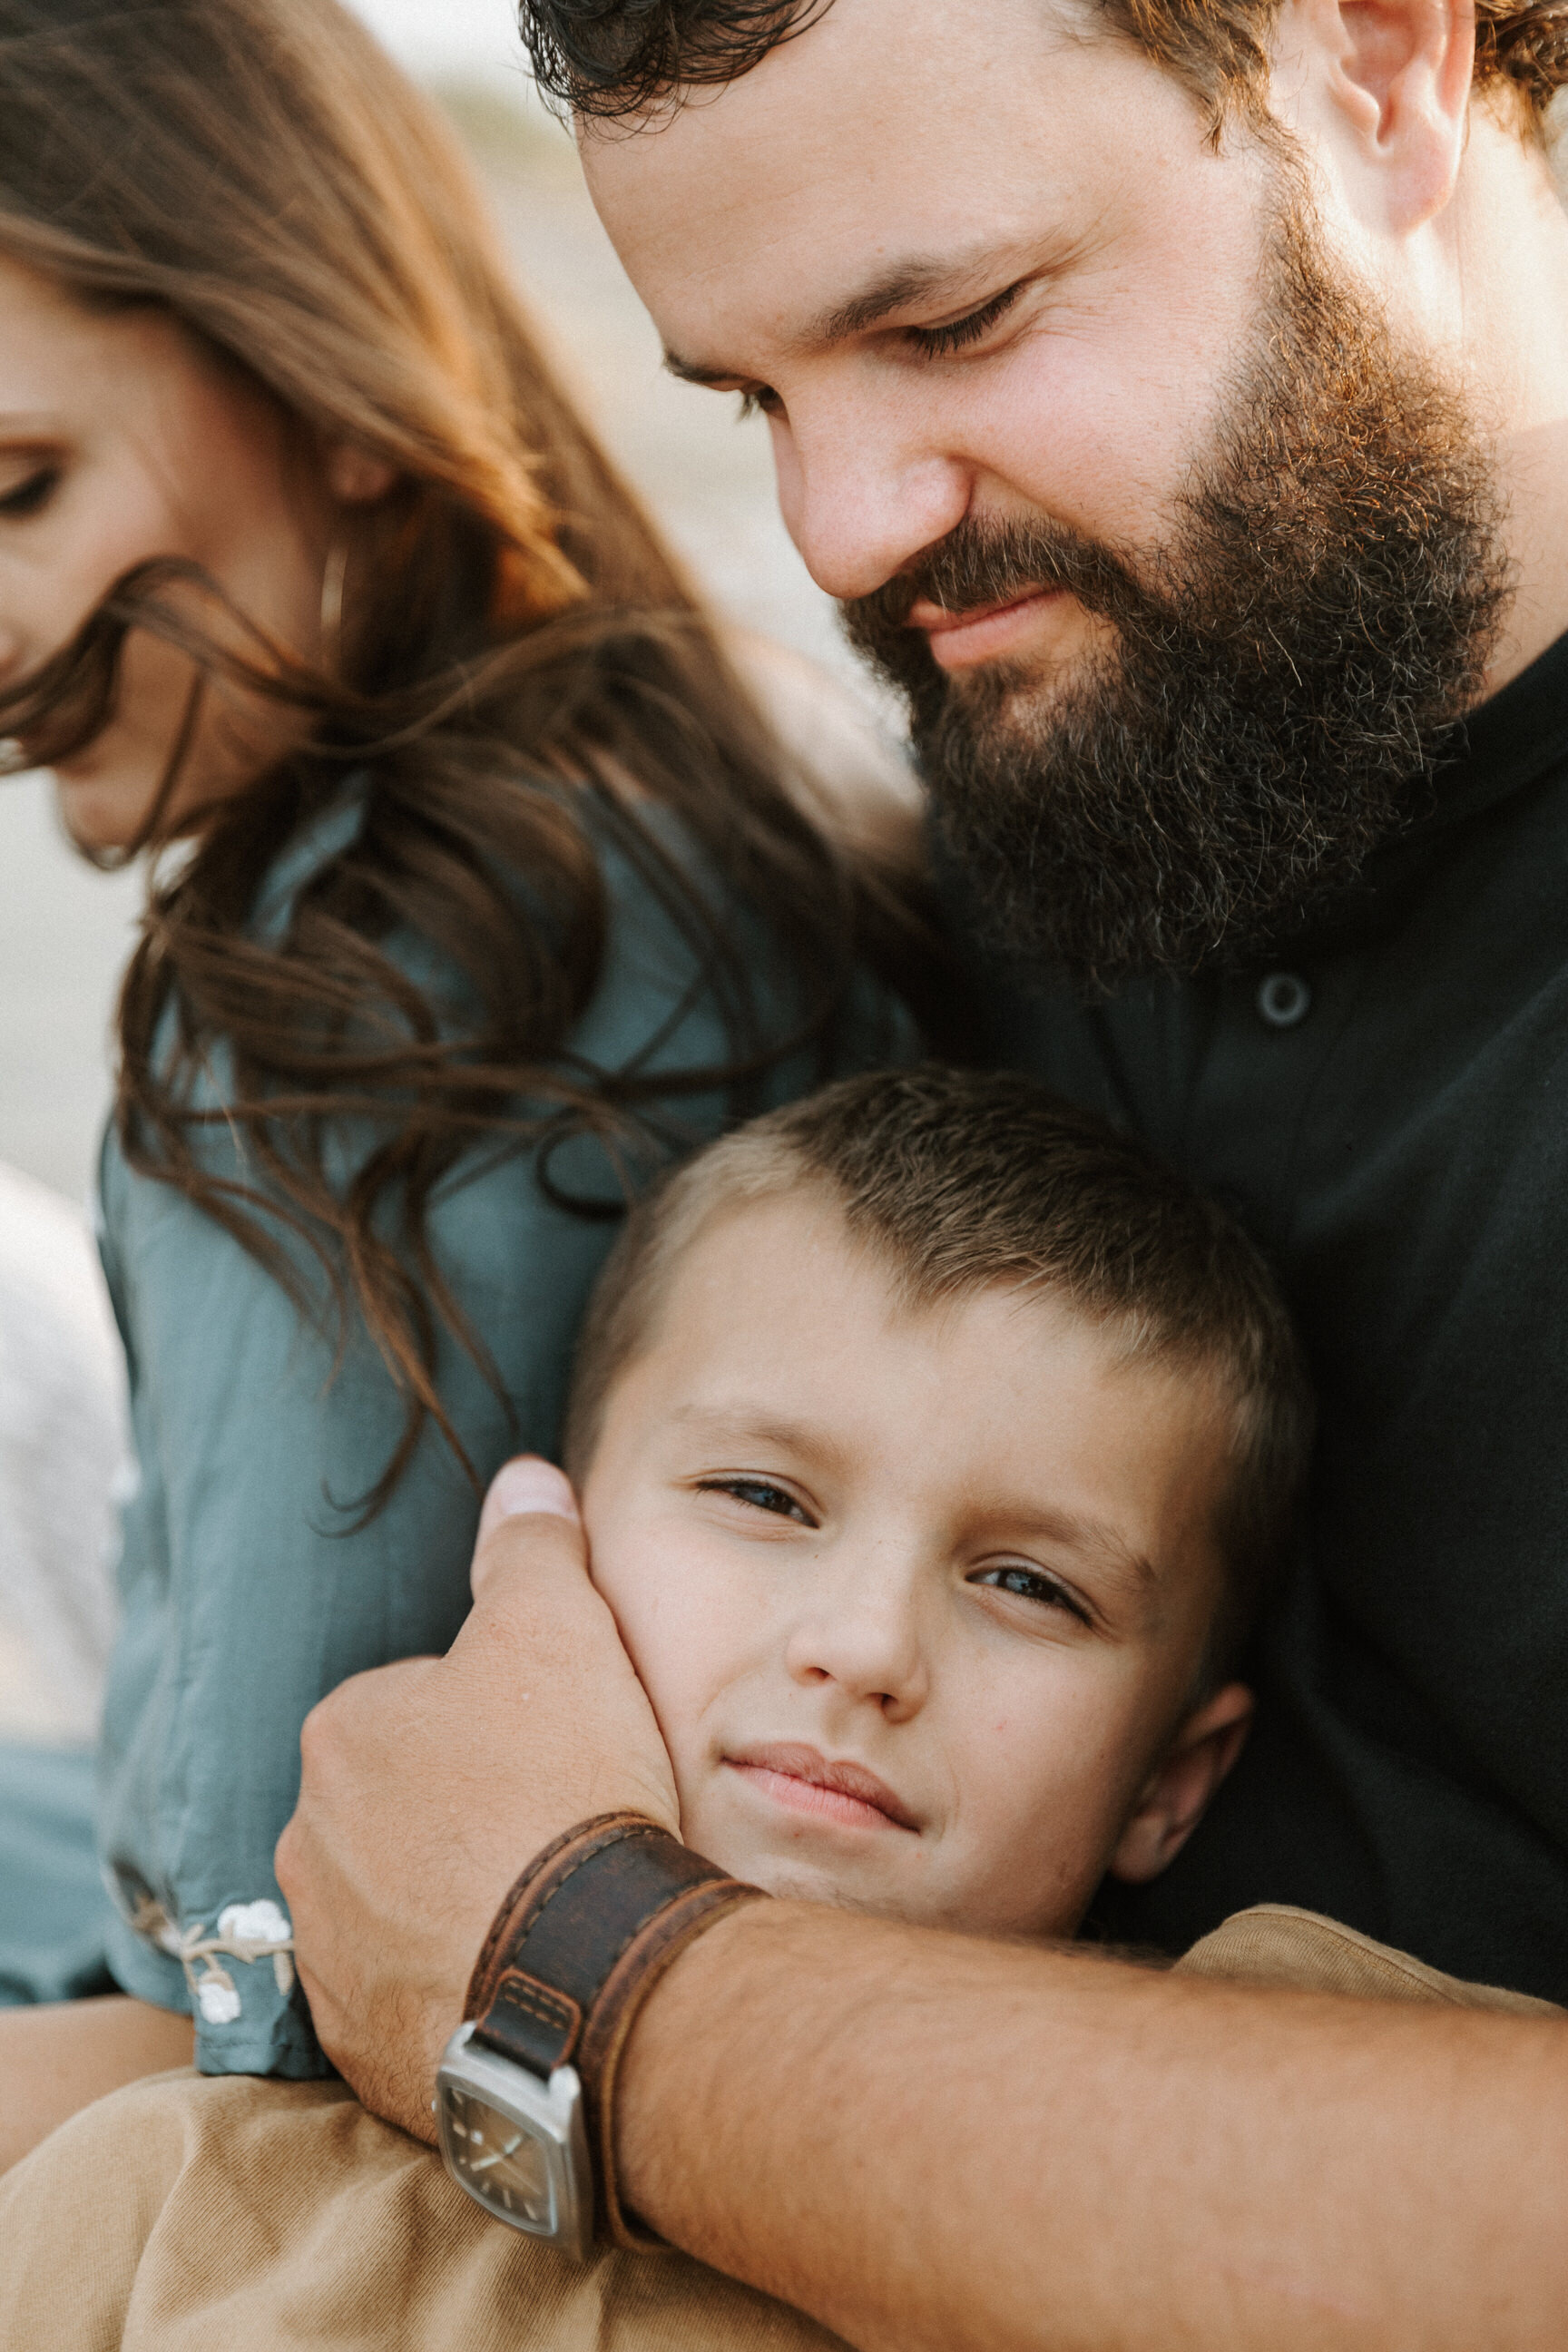 Creative poses for larger families, Part 2 | Shannon Miller Creative